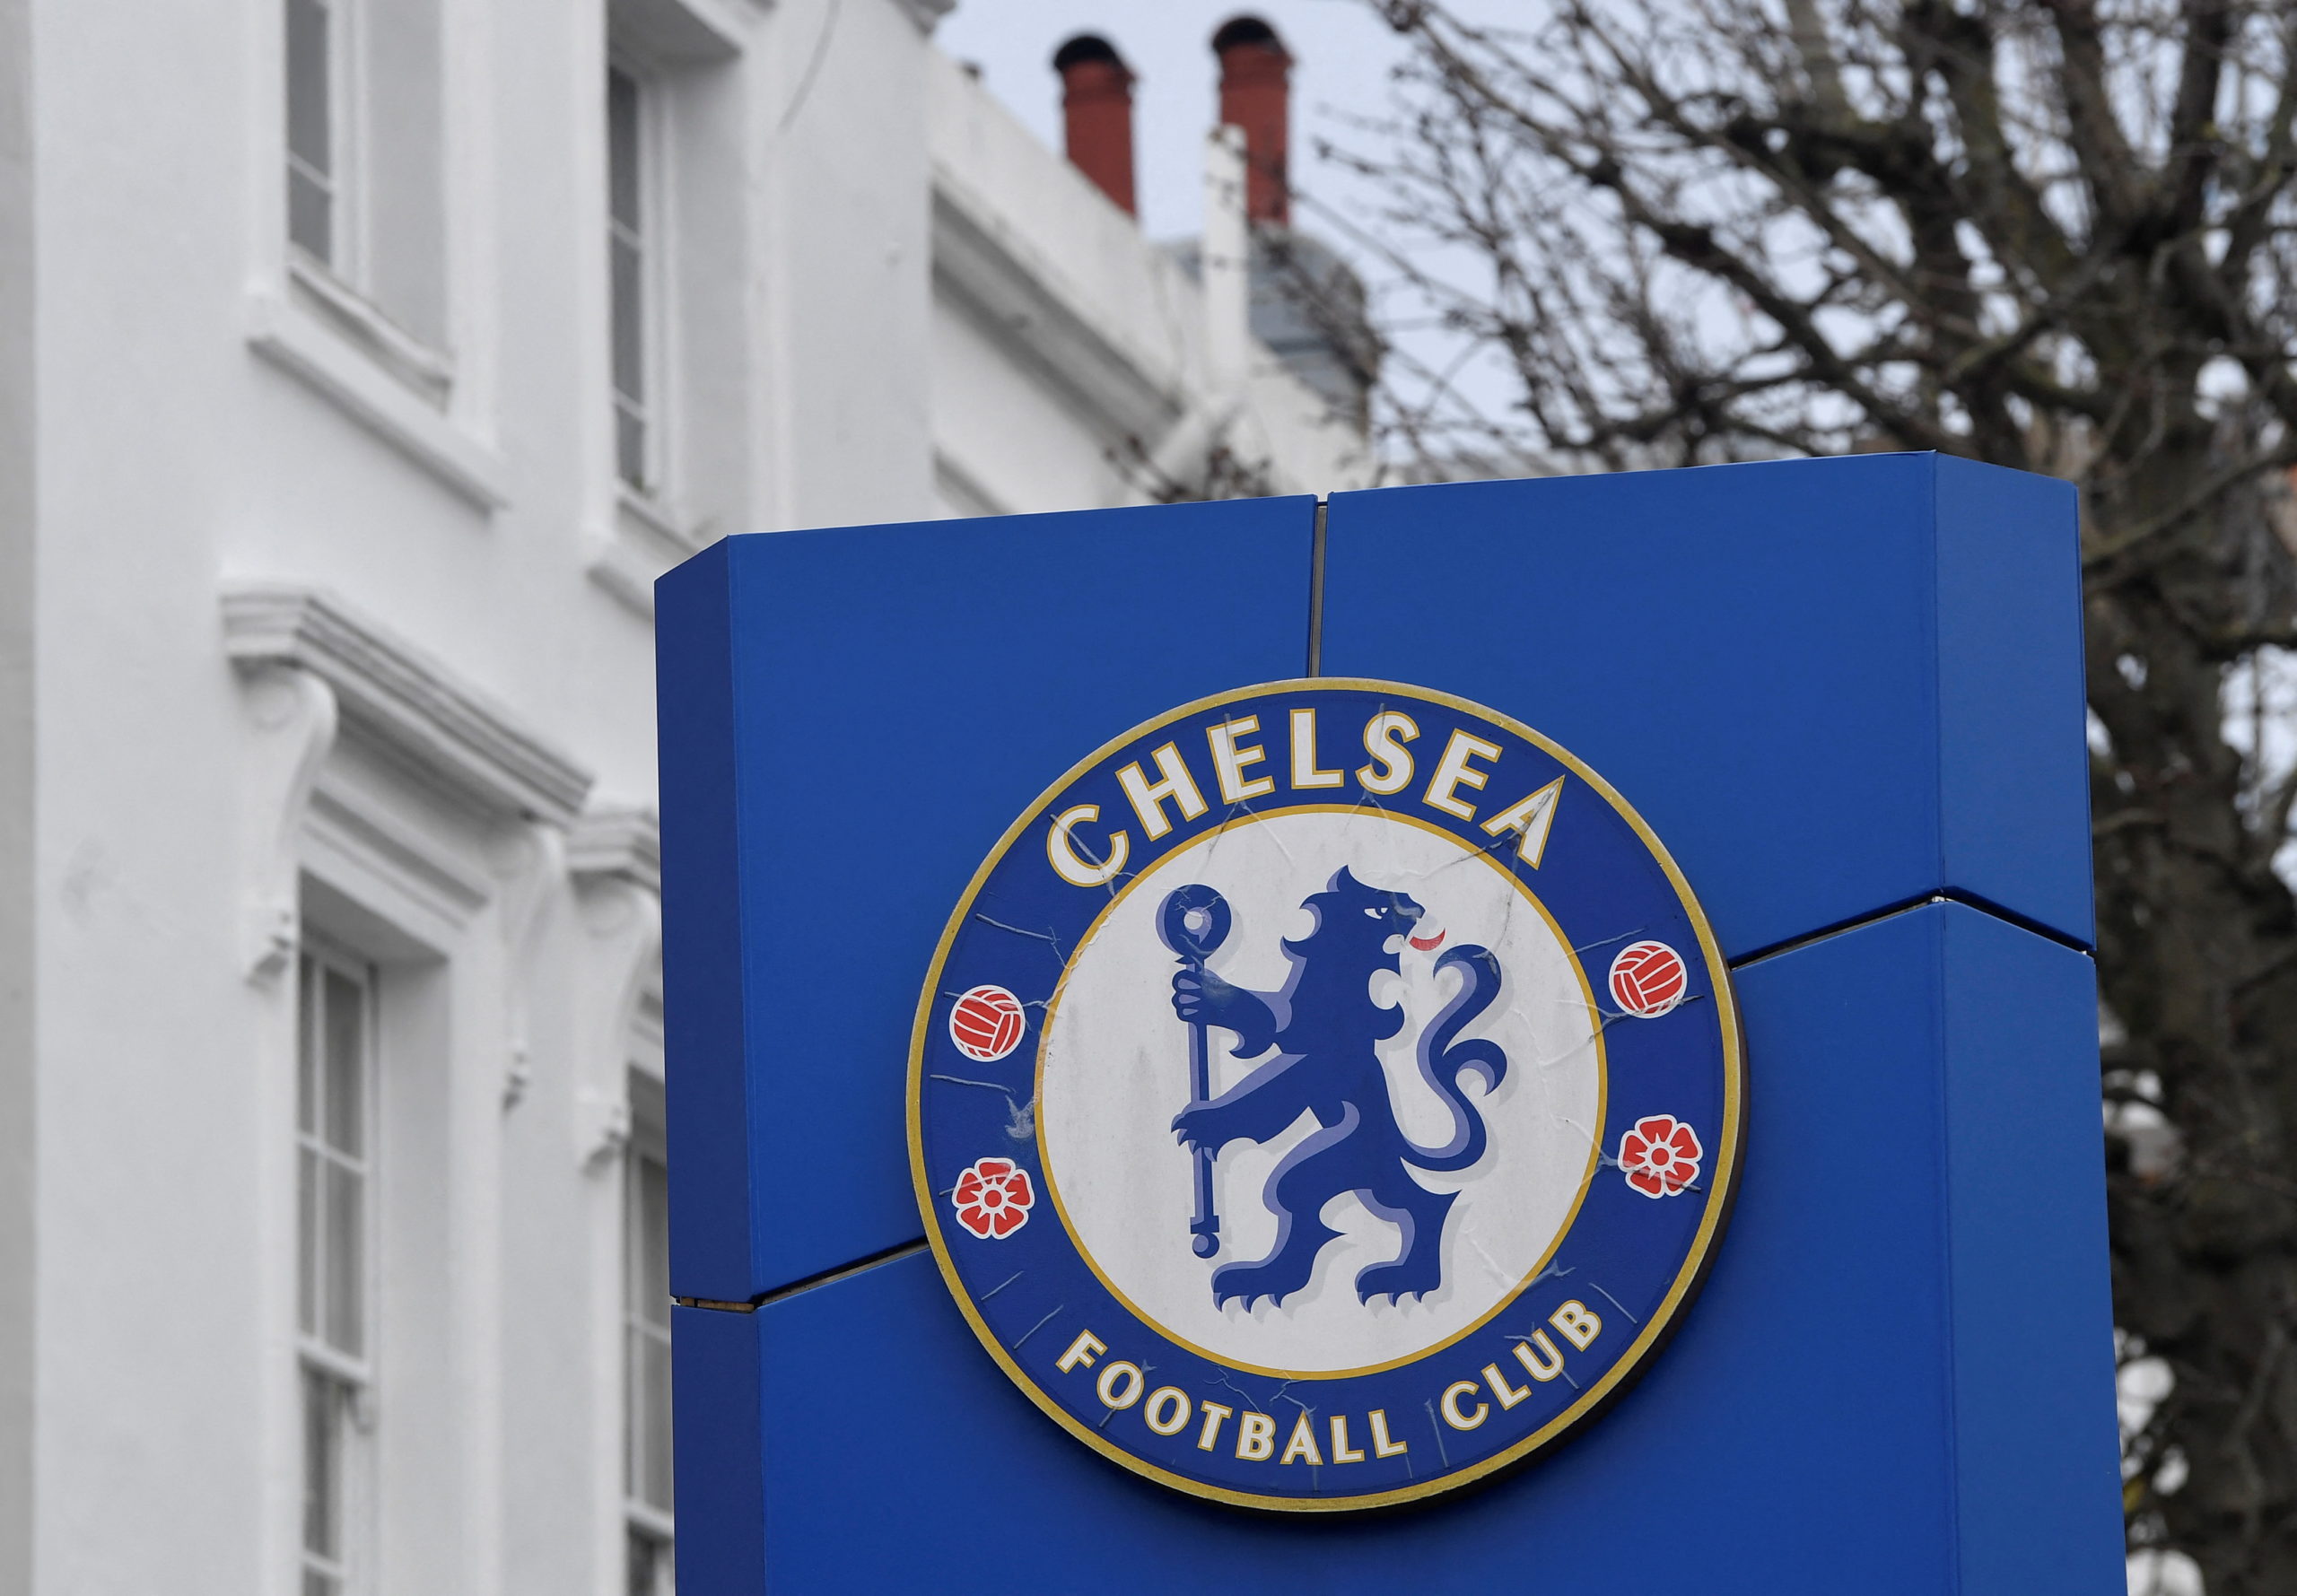 FILE PHOTO: A logo is seen at an entrance to Stamford Bridge, the stadium for Chelsea Football Club, after Russian businessman Roman Abramovich said on Wednesday that he would sell Chelsea, 19 years after buying it, as Russia's invasion of Ukraine continues, in London, Britain March 3, 2022. 